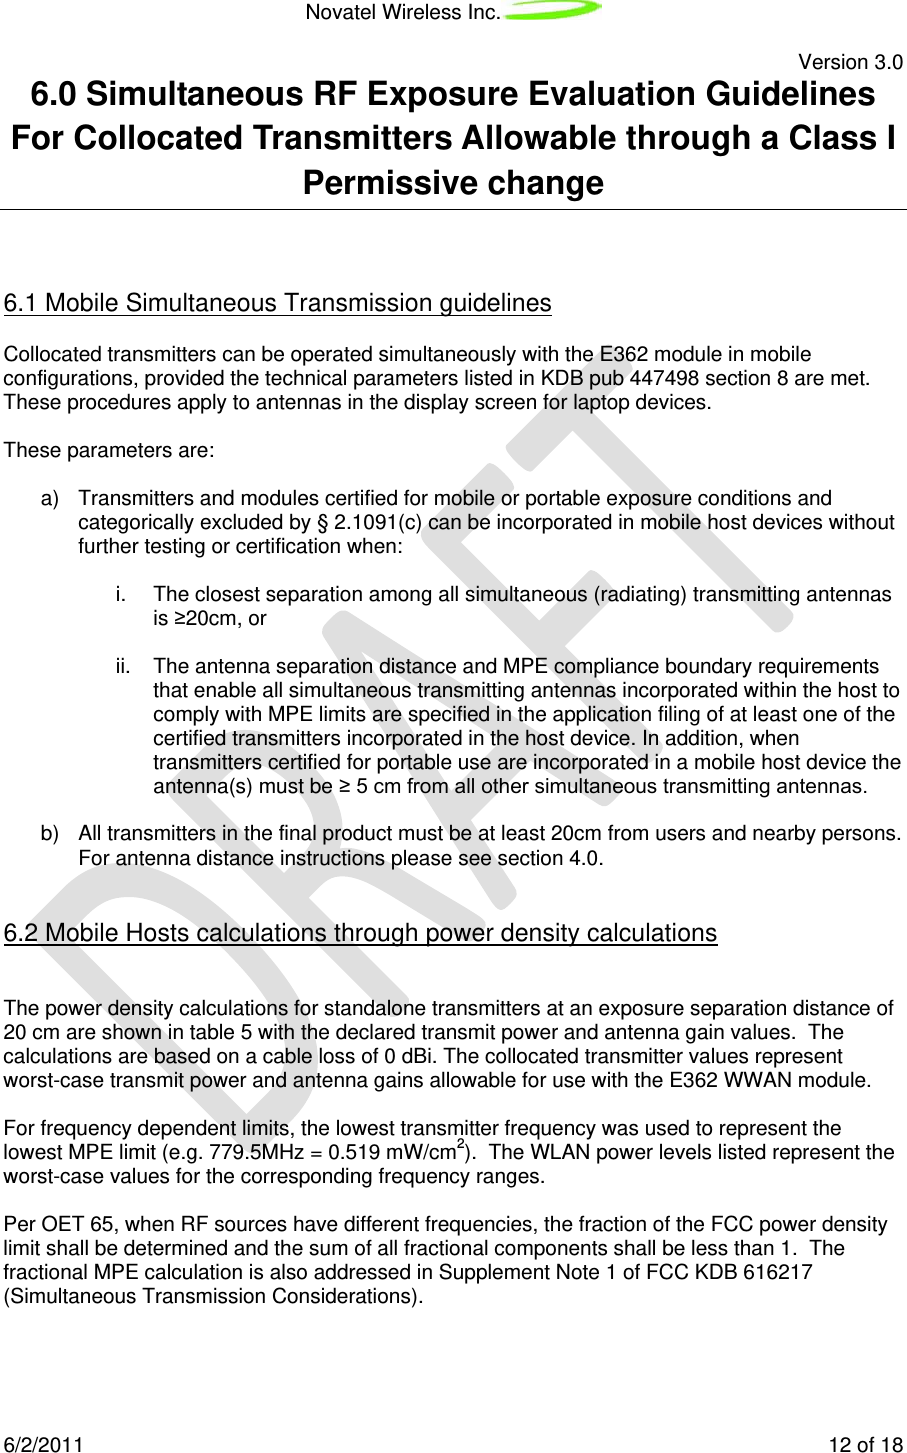 Novatel Wireless Inc.   Version 3.0 6/2/2011    12 of 18 6.0 Simultaneous RF Exposure Evaluation Guidelines For Collocated Transmitters Allowable through a Class I Permissive change  6.1 Mobile Simultaneous Transmission guidelines Collocated transmitters can be operated simultaneously with the E362 module in mobile configurations, provided the technical parameters listed in KDB pub 447498 section 8 are met. These procedures apply to antennas in the display screen for laptop devices.  These parameters are:  a) Transmitters and modules certified for mobile or portable exposure conditions and categorically excluded by § 2.1091(c) can be incorporated in mobile host devices without further testing or certification when:   i. The closest separation among all simultaneous (radiating) transmitting antennas is ≥20cm, or  ii. The antenna separation distance and MPE compliance boundary requirements that enable all simultaneous transmitting antennas incorporated within the host to comply with MPE limits are specified in the application filing of at least one of the certified transmitters incorporated in the host device. In addition, when transmitters certified for portable use are incorporated in a mobile host device the antenna(s) must be ≥ 5 cm from all other simultaneous transmitting antennas.  b) All transmitters in the final product must be at least 20cm from users and nearby persons. For antenna distance instructions please see section 4.0.  6.2 Mobile Hosts calculations through power density calculations  The power density calculations for standalone transmitters at an exposure separation distance of 20 cm are shown in table 5 with the declared transmit power and antenna gain values.  The calculations are based on a cable loss of 0 dBi. The collocated transmitter values represent worst-case transmit power and antenna gains allowable for use with the E362 WWAN module.  For frequency dependent limits, the lowest transmitter frequency was used to represent the lowest MPE limit (e.g. 779.5MHz = 0.519 mW/cm2).  The WLAN power levels listed represent the worst-case values for the corresponding frequency ranges.  Per OET 65, when RF sources have different frequencies, the fraction of the FCC power density limit shall be determined and the sum of all fractional components shall be less than 1.  The fractional MPE calculation is also addressed in Supplement Note 1 of FCC KDB 616217 (Simultaneous Transmission Considerations).    